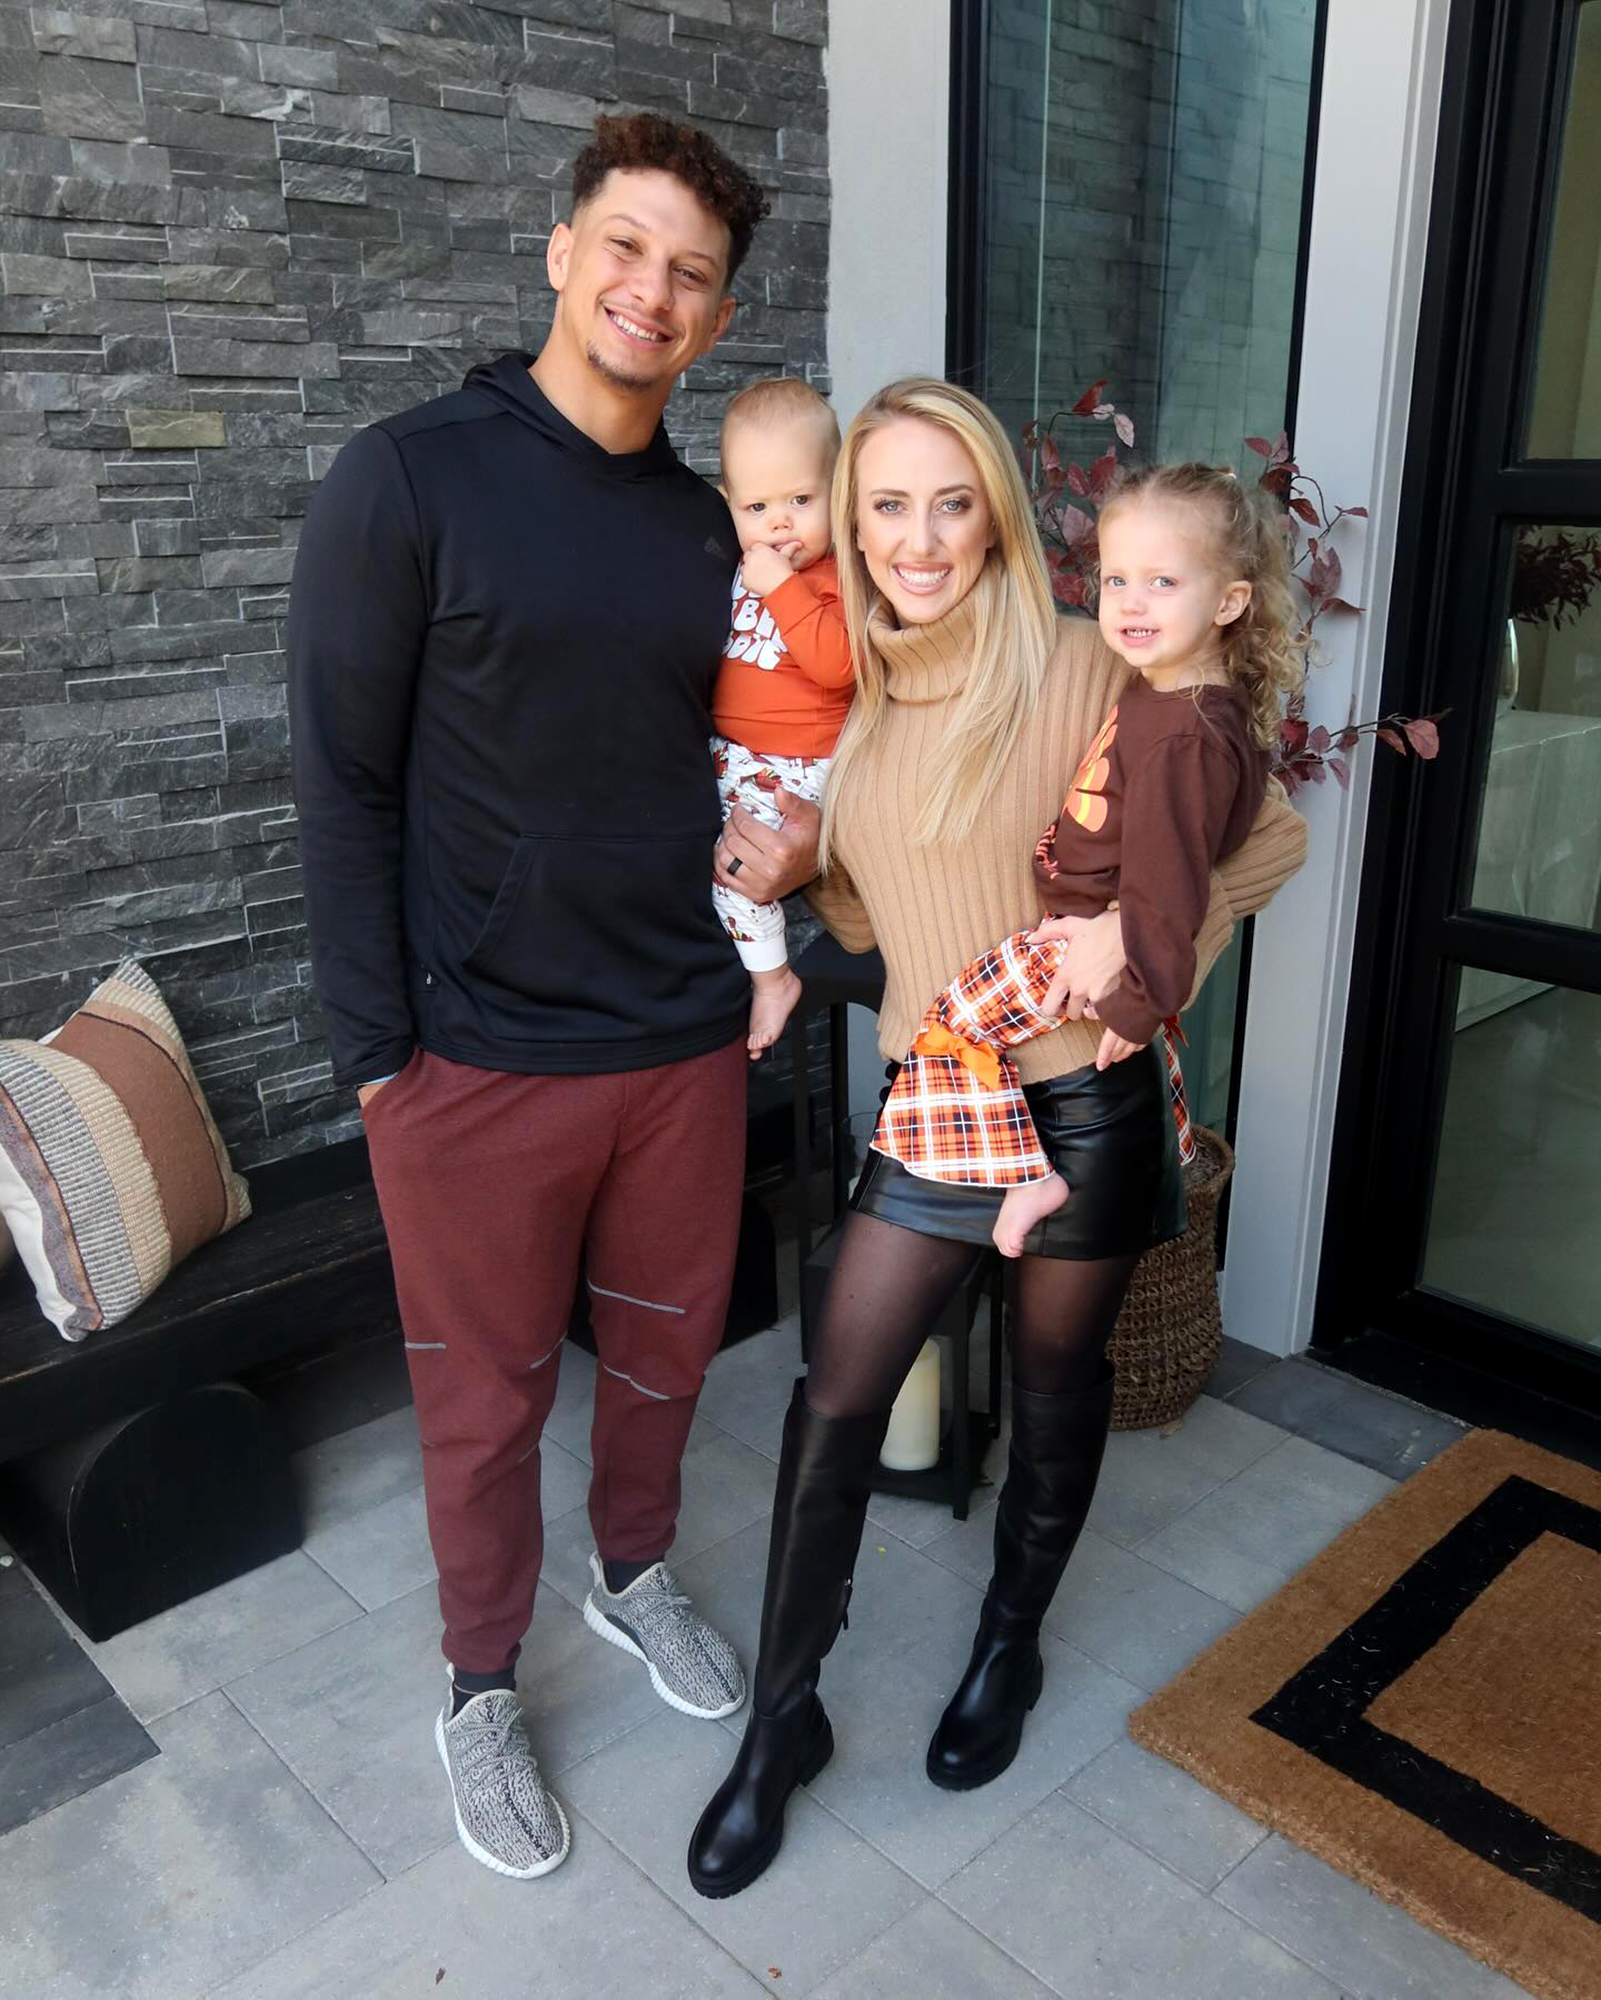 Patrick Mahomes Is Disappointed He Will 'Miss Christmas Eve With My Kids’